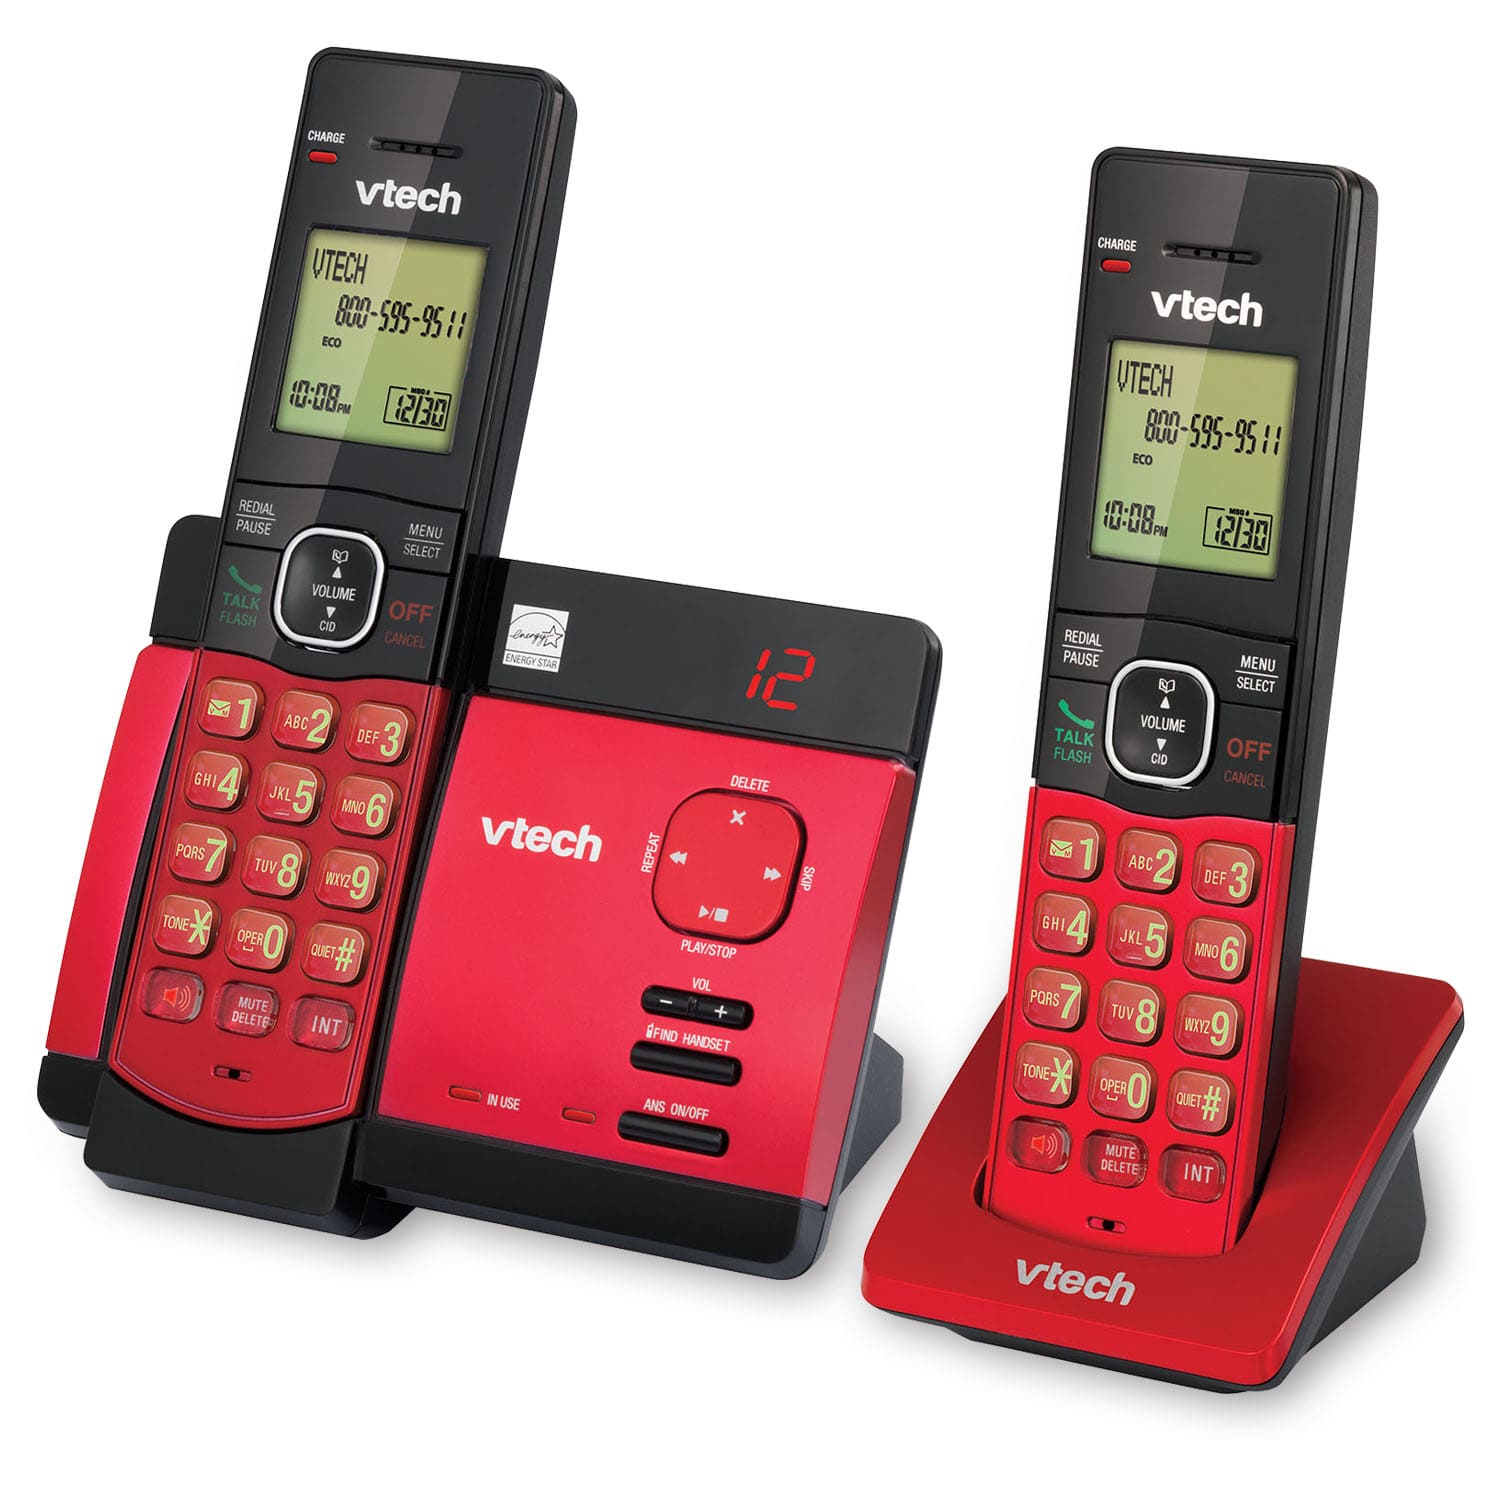 2 Handset Cordless Phone System with Caller ID/Call Waiting